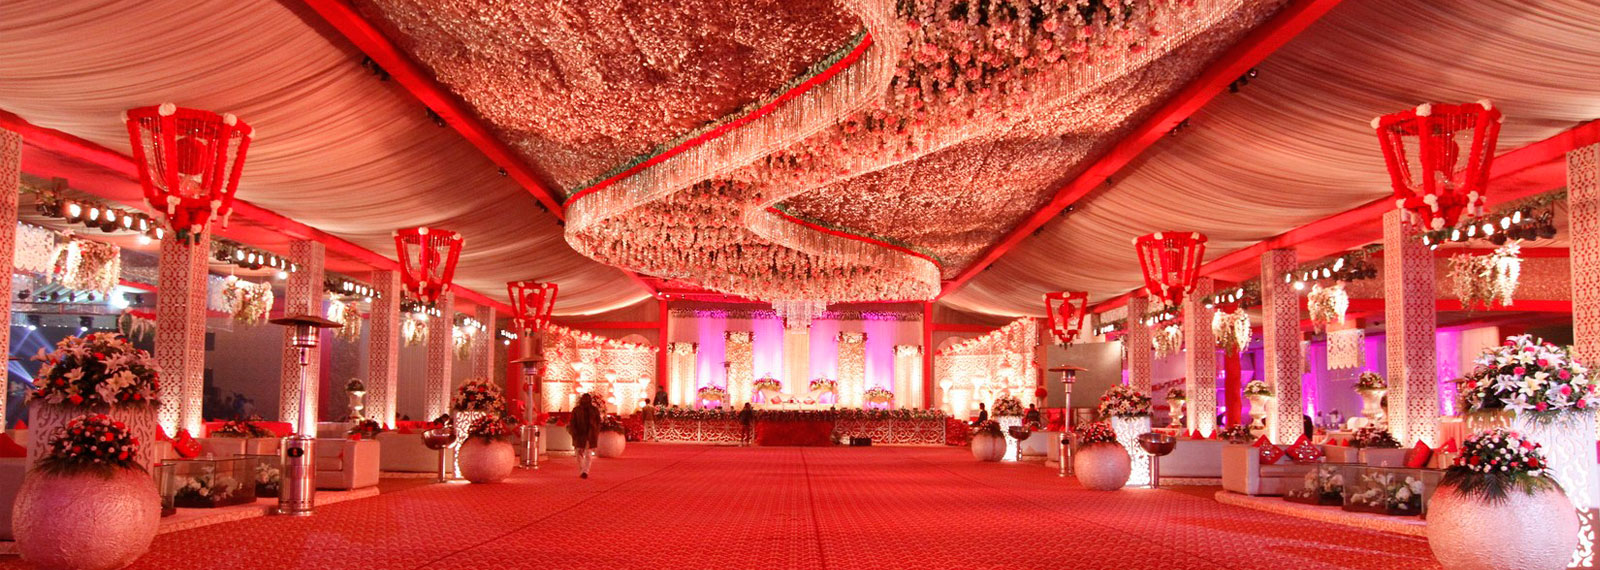 wedoweddings are wedding planner and event management Ahmedabad India, Royal Indian  wedding planner in Gujarat India, Palace wedding in India, Wedding  organizer, Wedding reception planning, Online wedding planner India